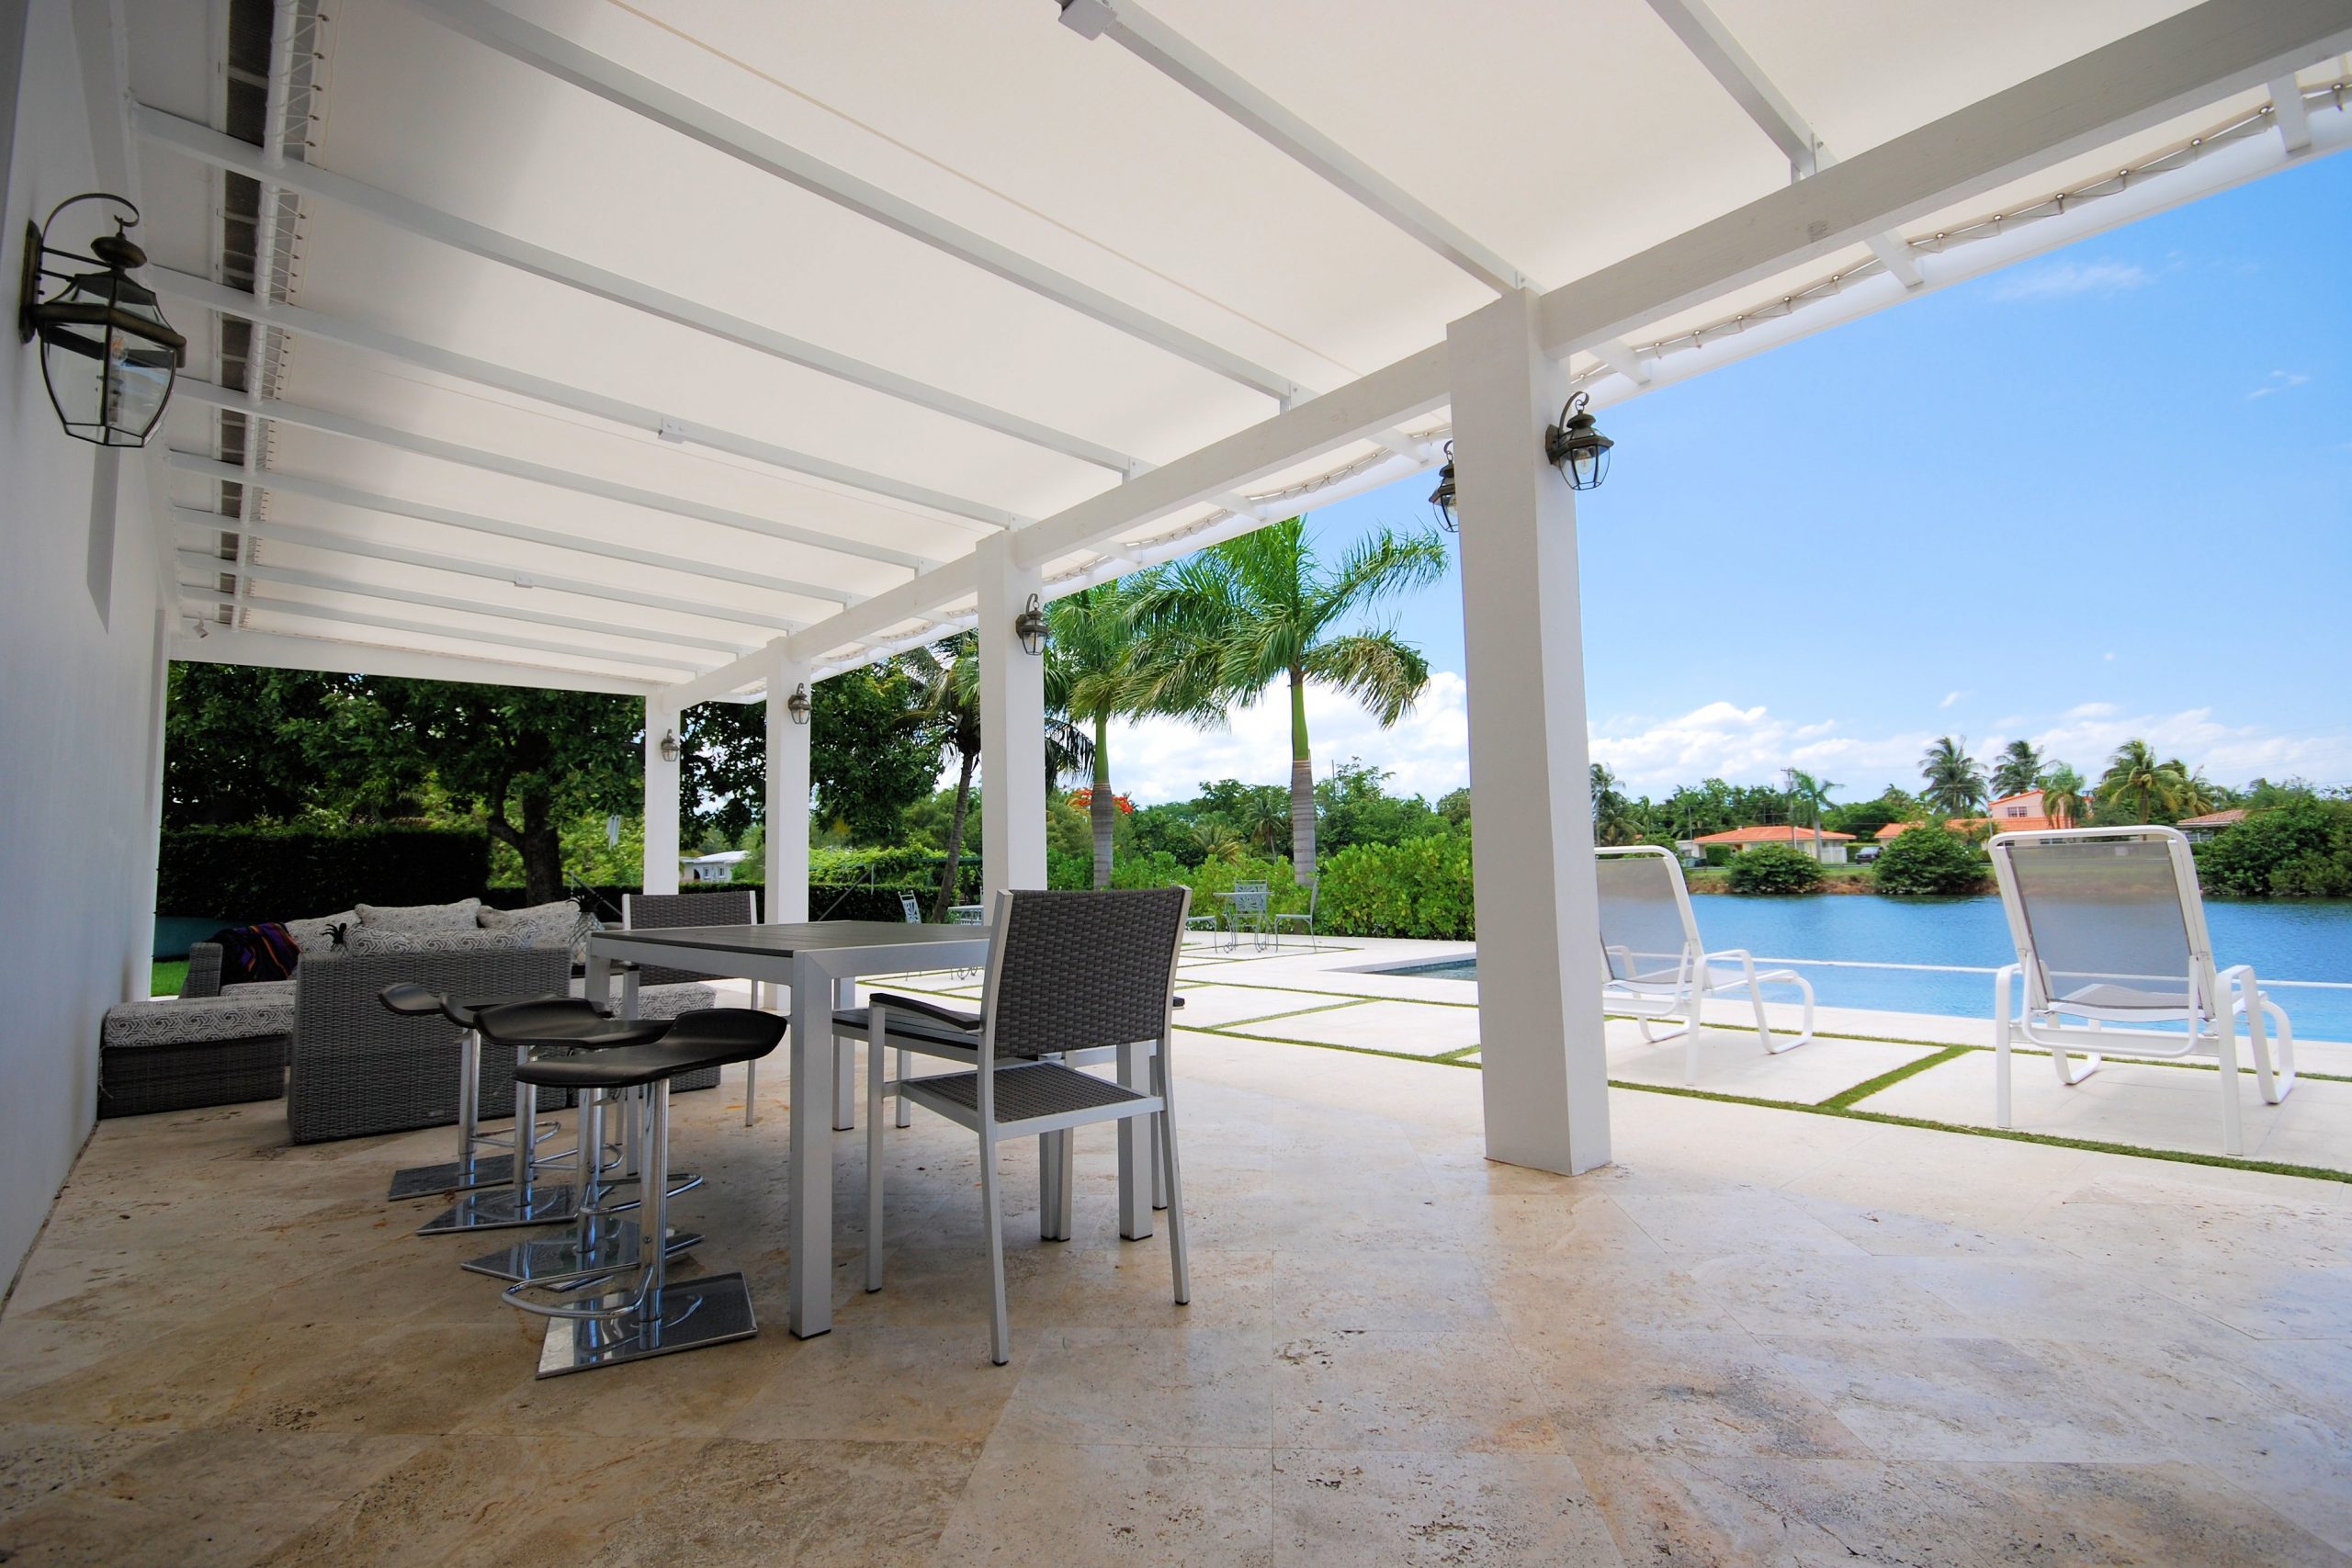 Archtitectural Patio Canopy – by Miami Awning Co (10)